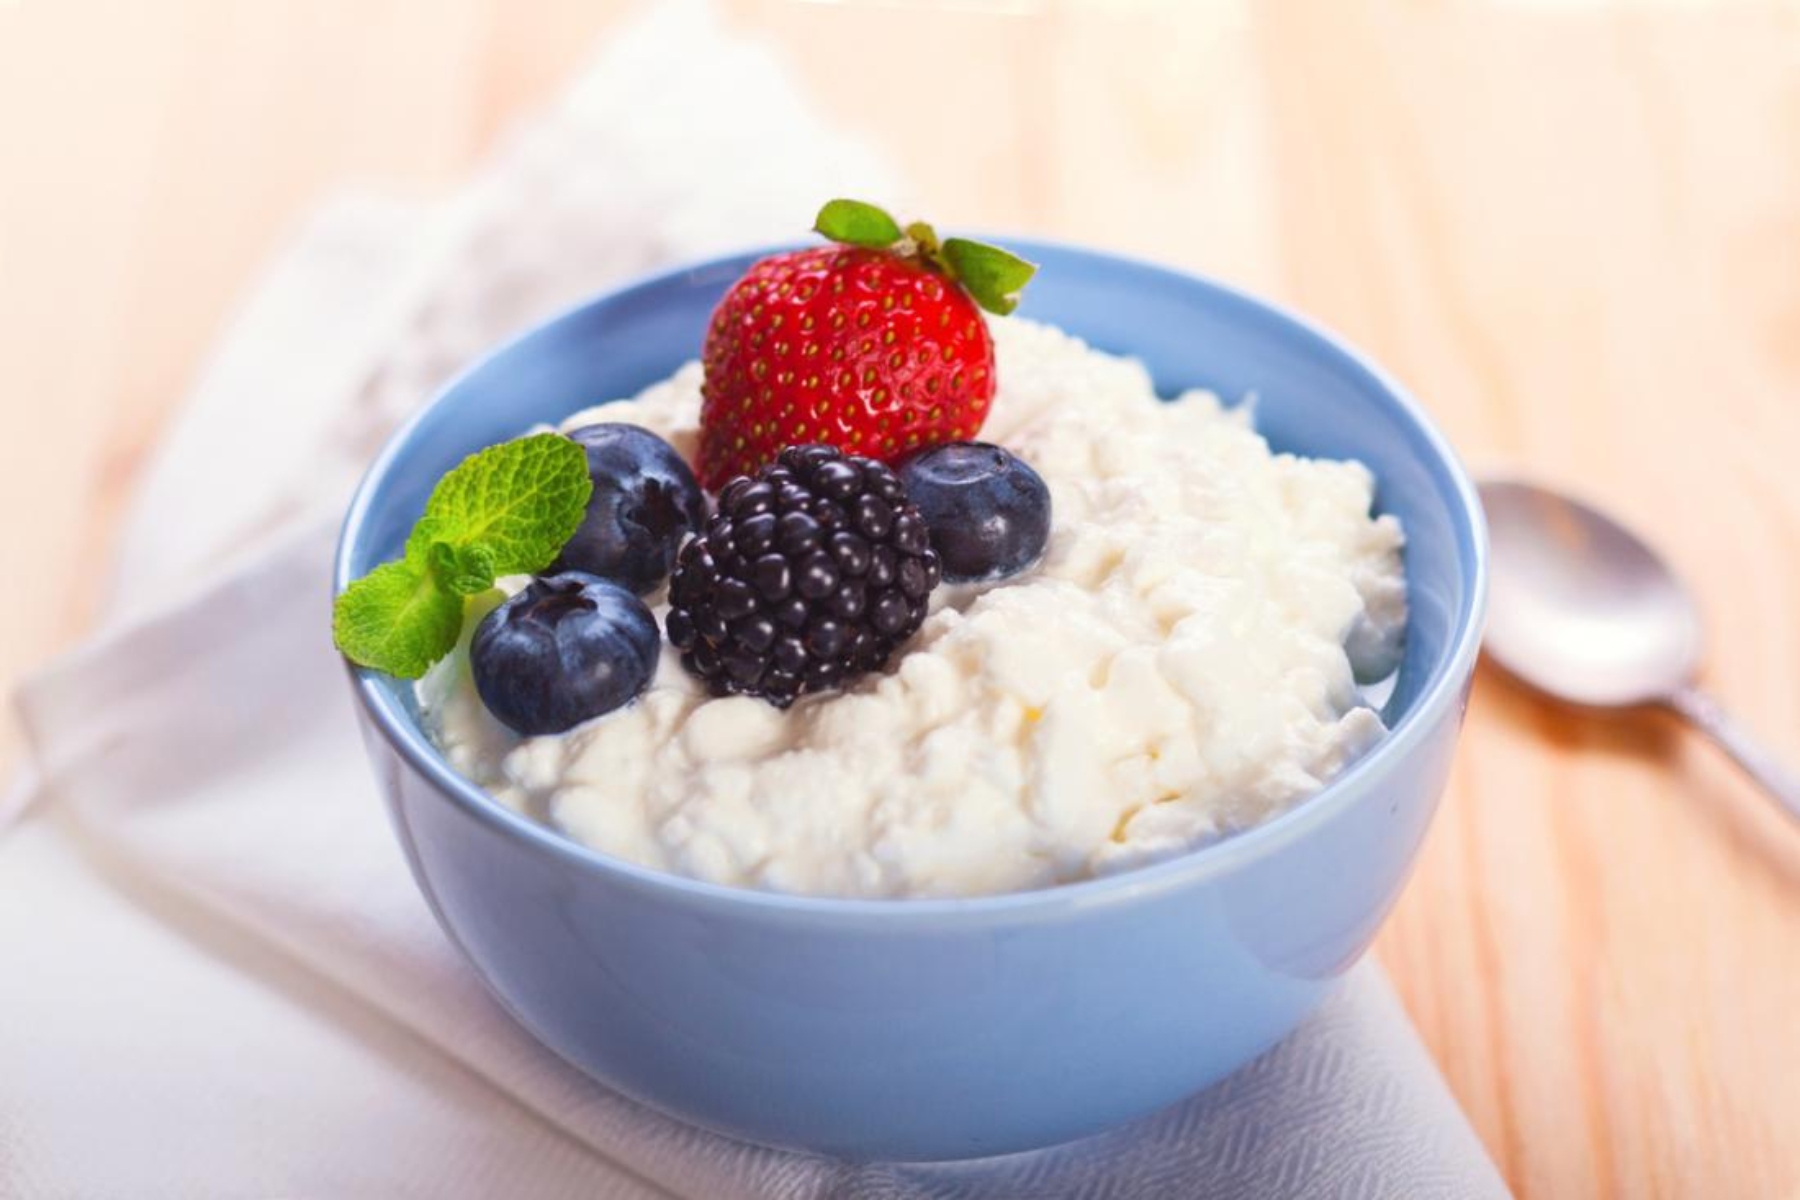 Cottage τυρί: Ποια τα διατροφικά οφέλη του cottage cheese;